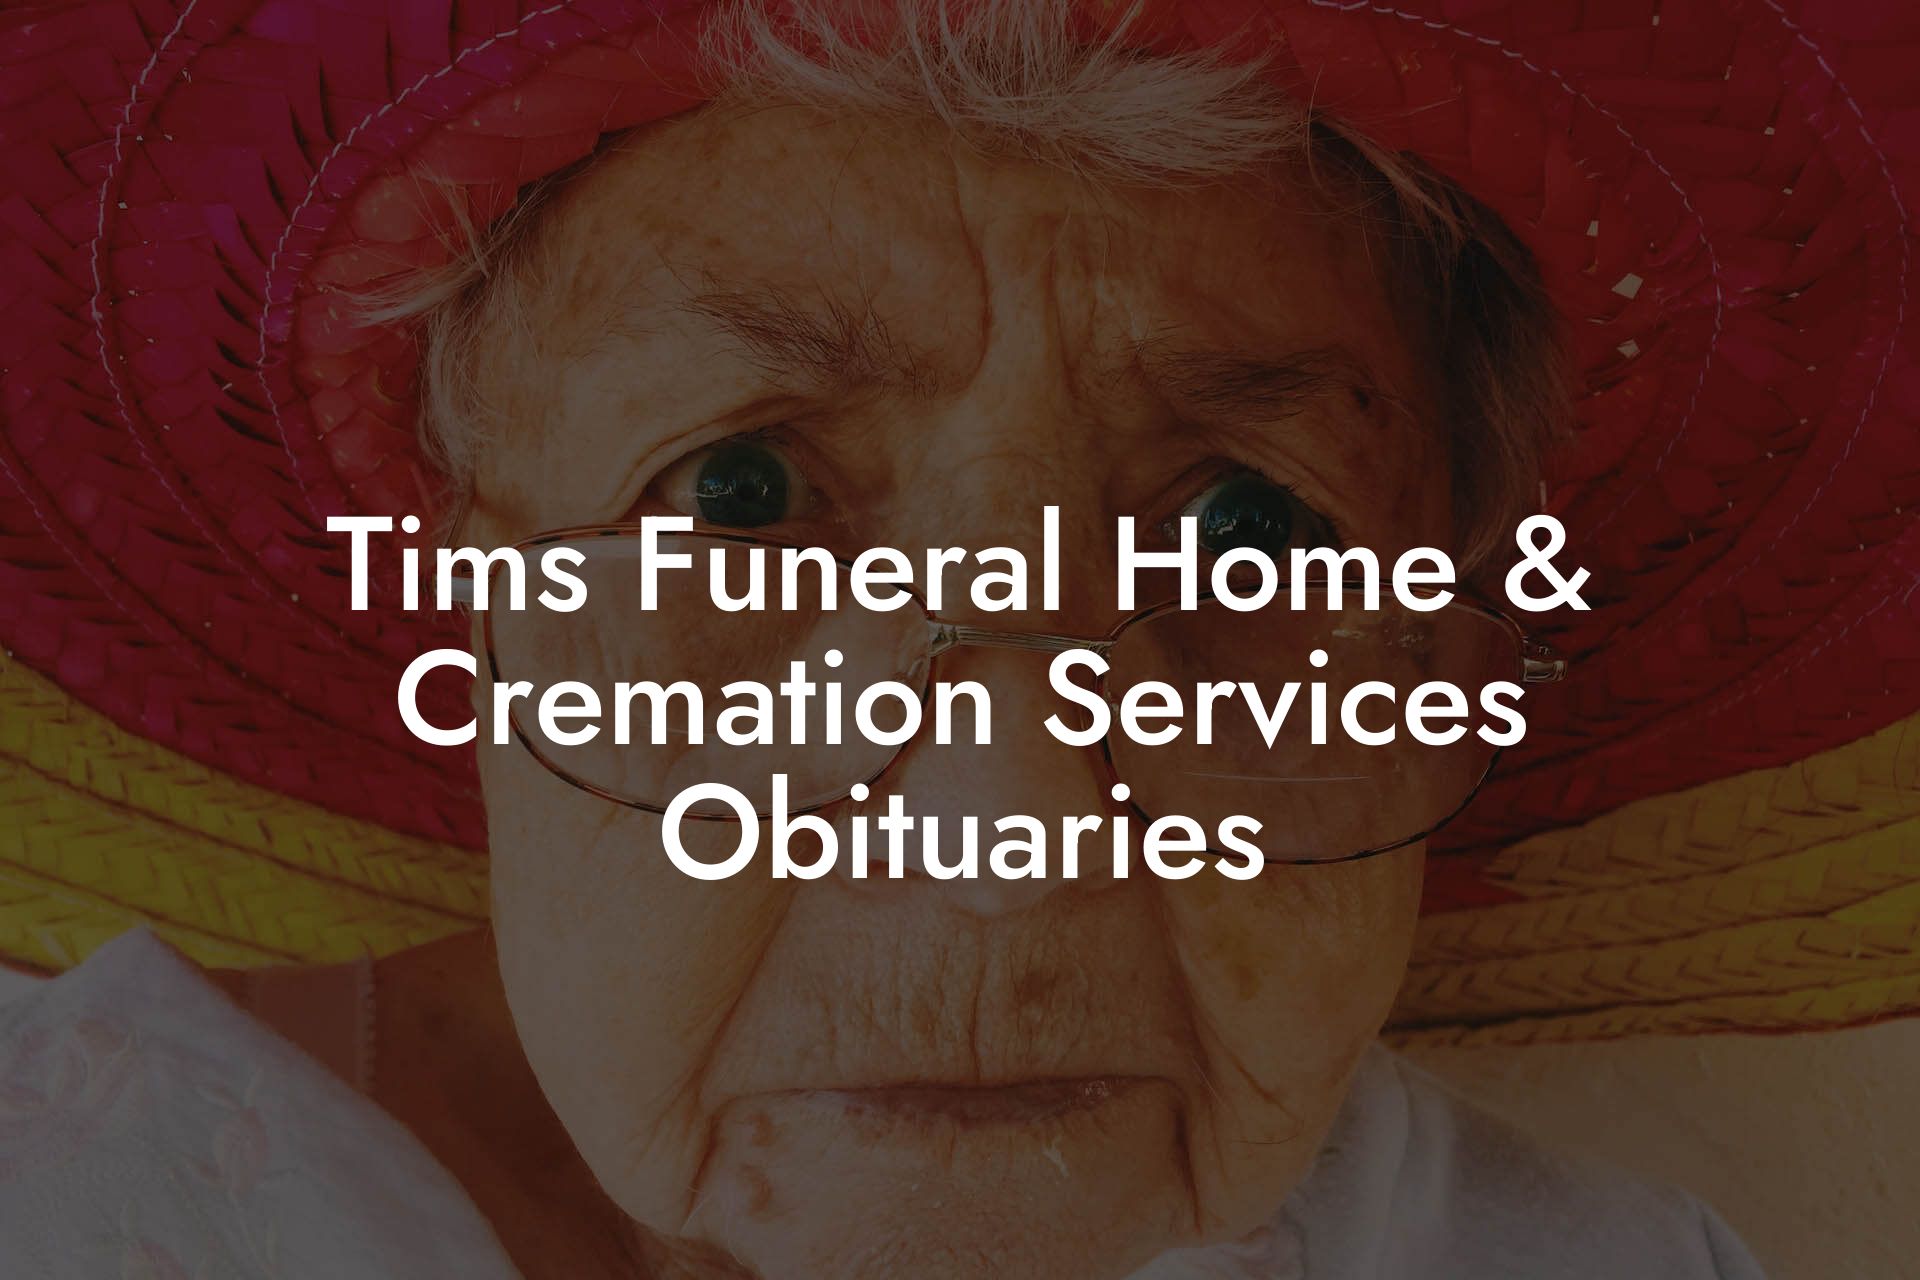 Tims Funeral Home & Cremation Services Obituaries